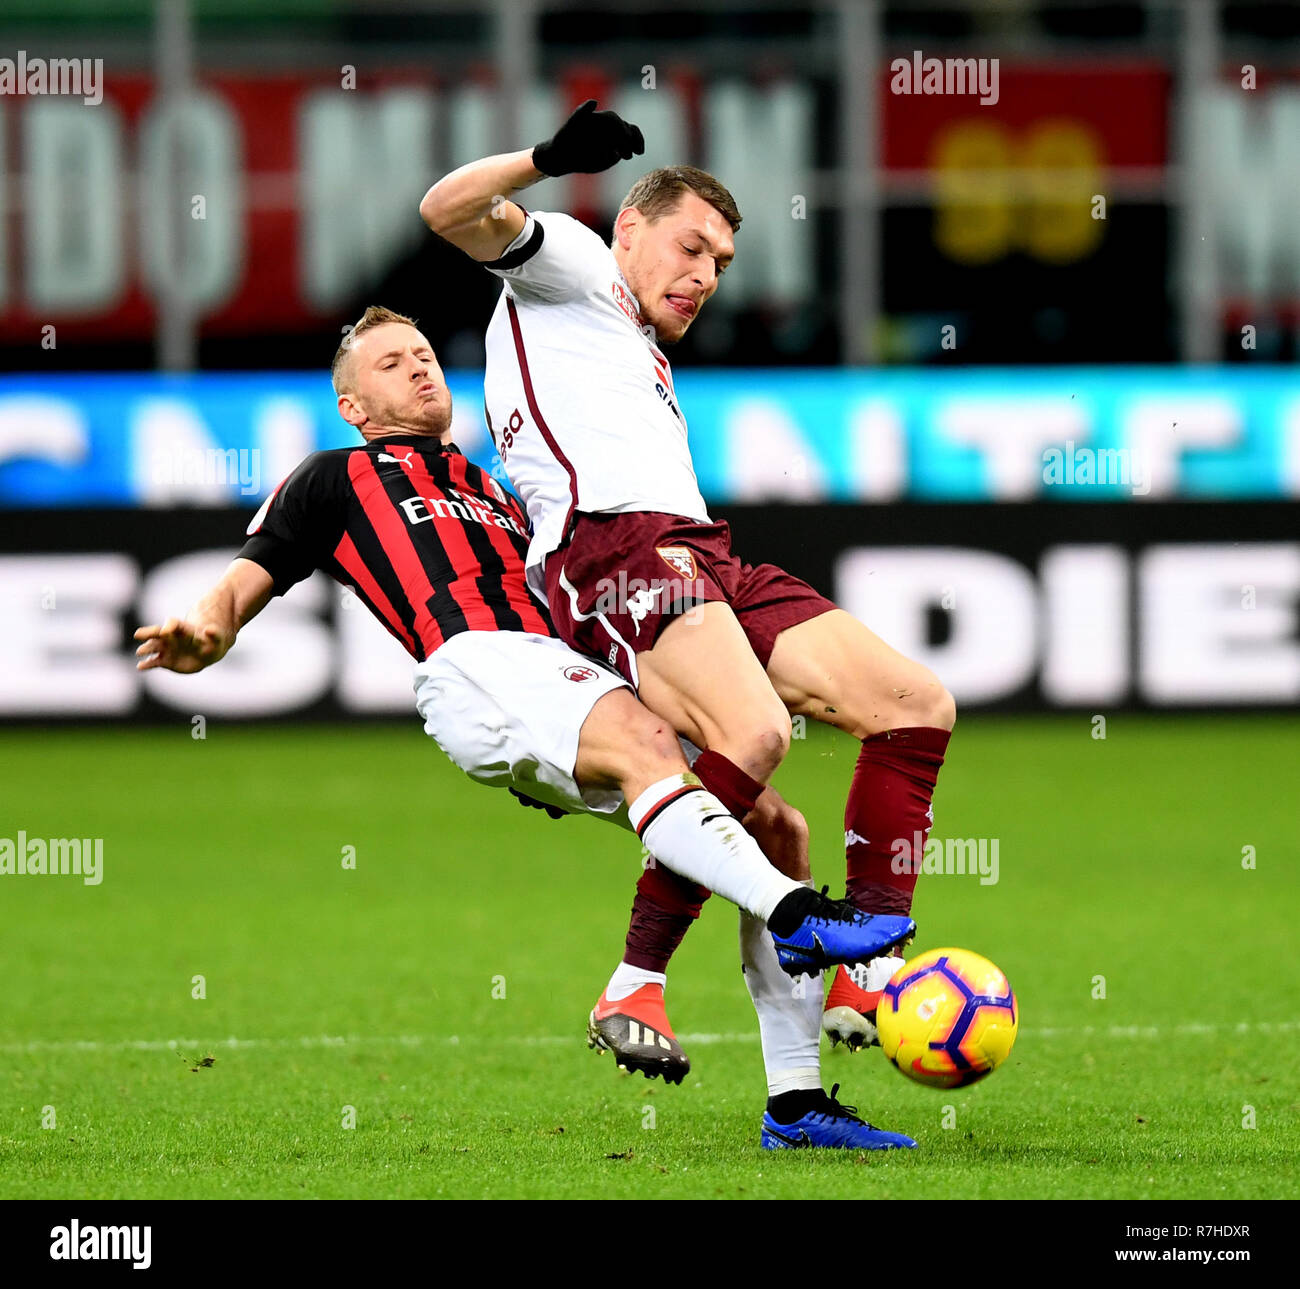 Milan, Italy. 9th Dec, 2018. AC Milan's Ignazio Abate (L) vies with Torino's Andrea Belotti during the Serie A soccer match between AC Milan and Torino in Milan, Italy, Dec. 9, 2018. The match ended in a 0-0 draw. Credit: Alberto Lingria/Xinhua/Alamy Live News Stock Photo